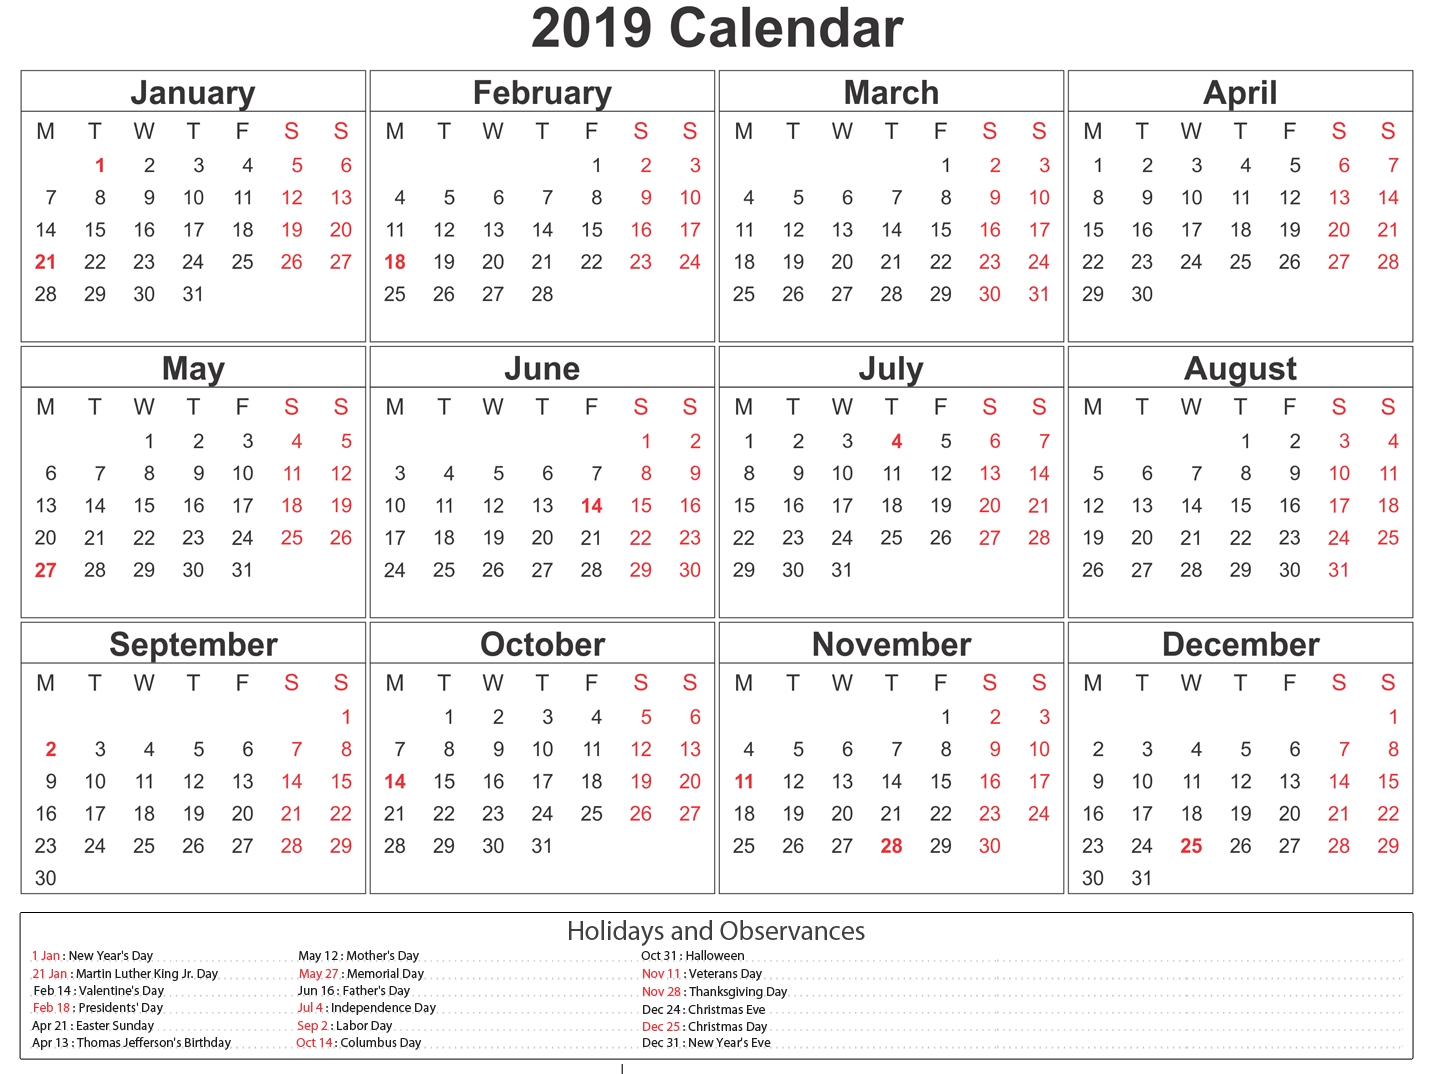 Printable South Africa 2019 Calendar #southafrica #calendar Downloadable Monthly Planner For 2020 With Public Holidays For South Africa